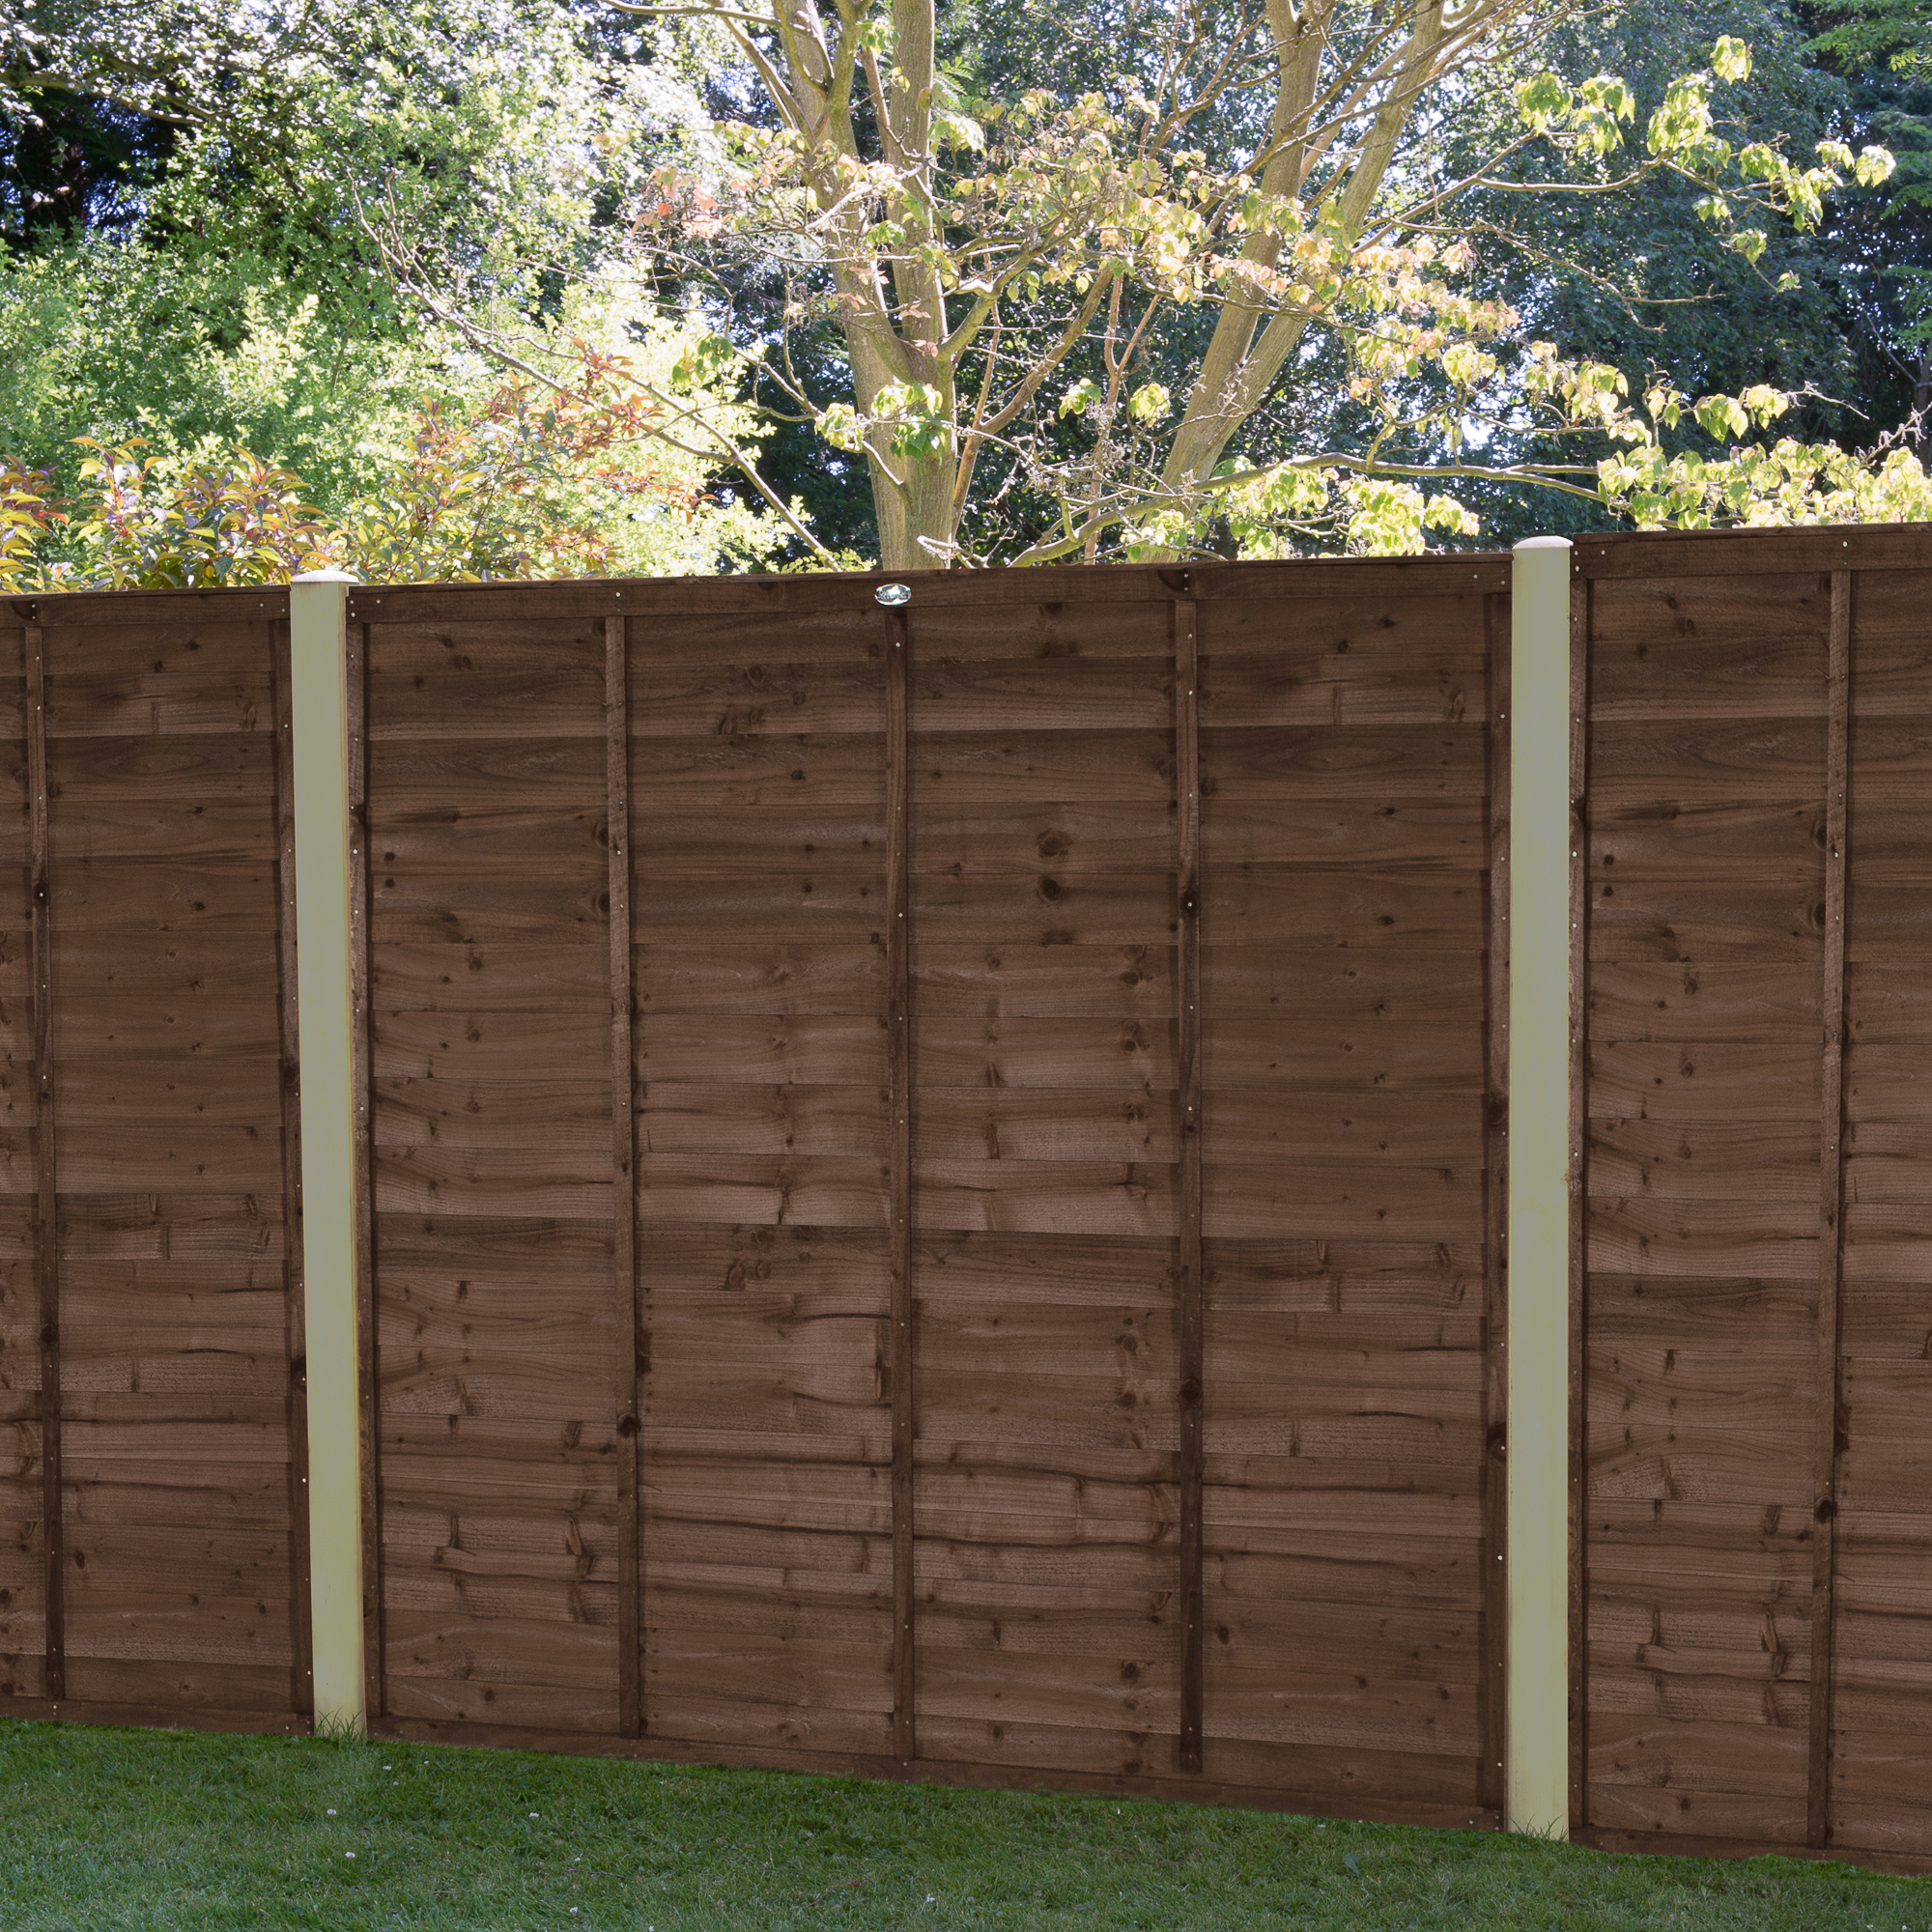 Image of Forest Garden Brown Pressure Treated Superlap Fence Panel - 1830 x 1680mm - 6 x 5'6ft - Pack of 5